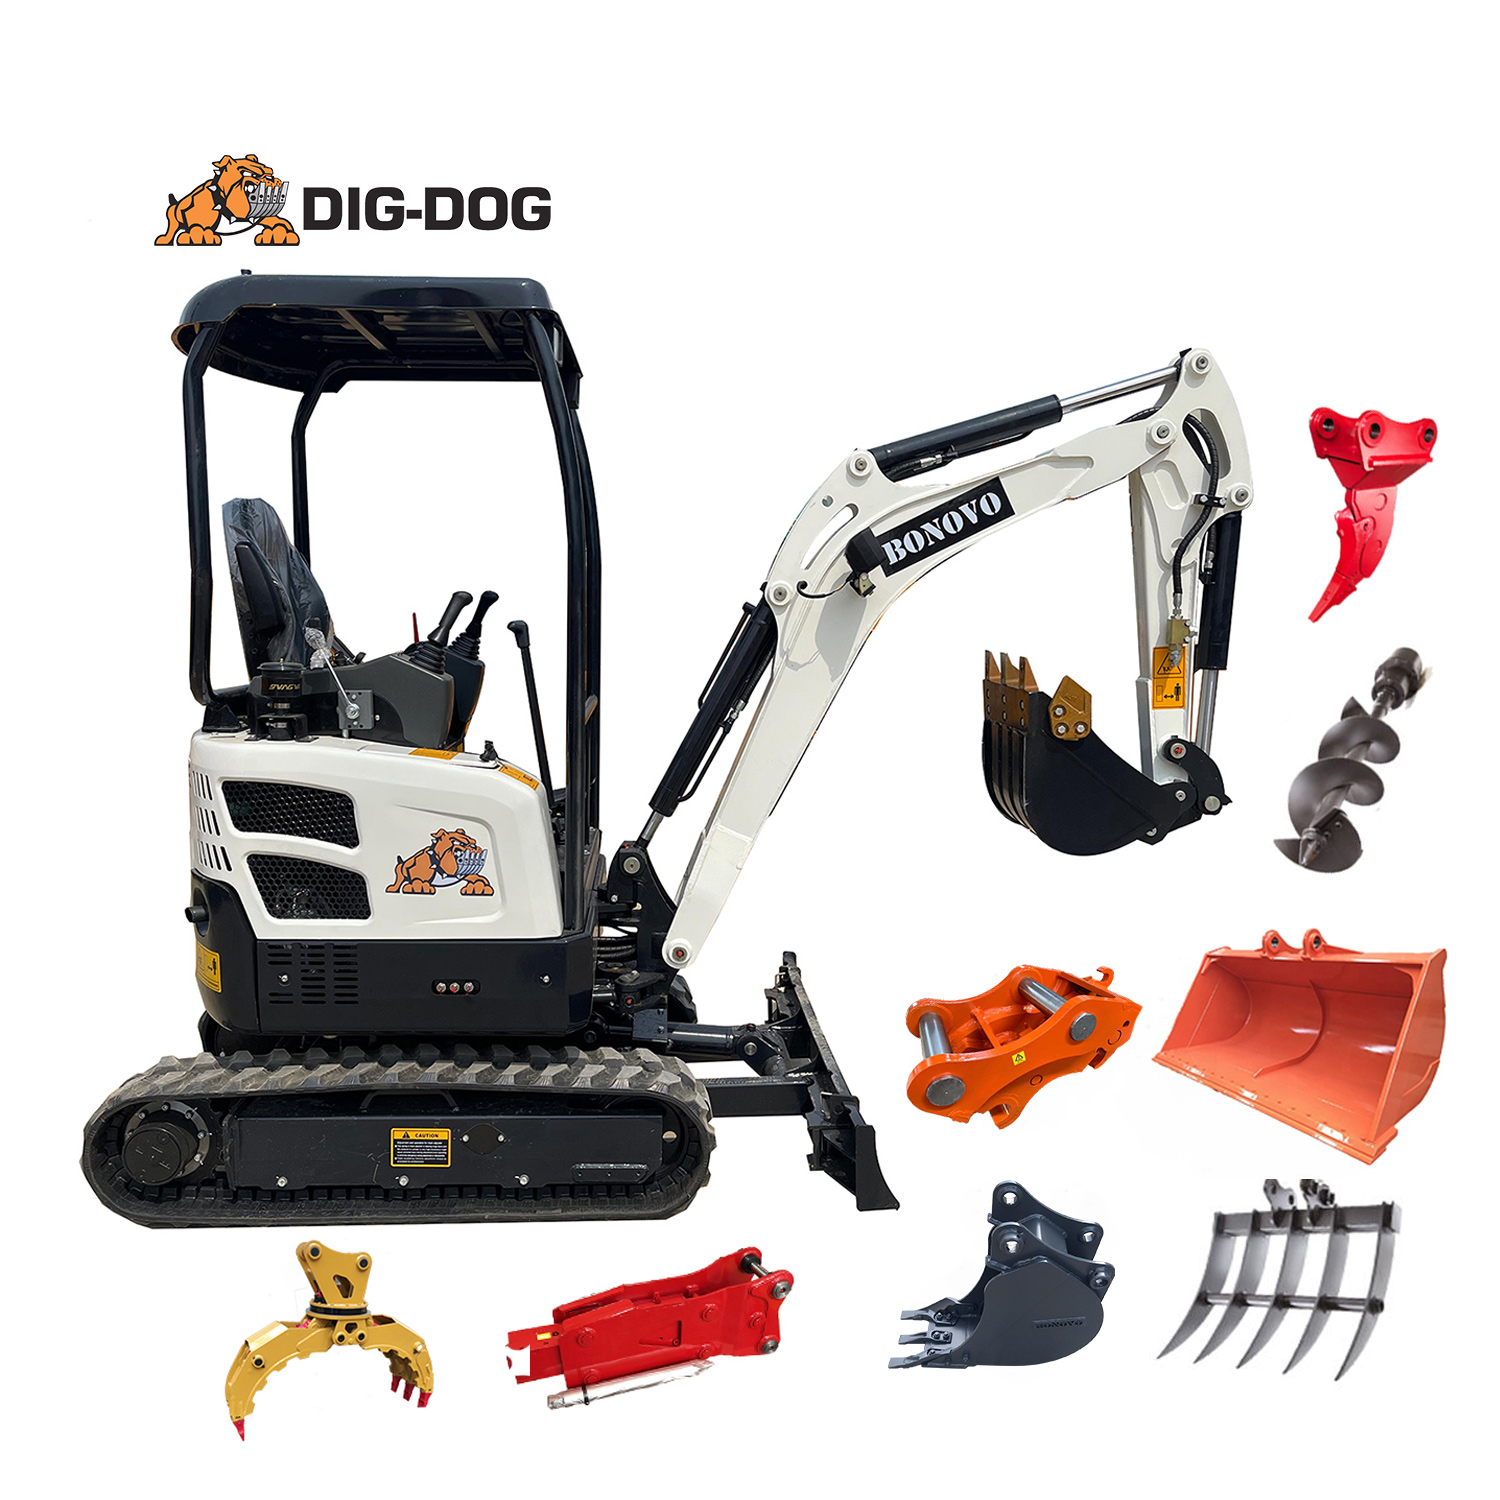 Buying a suitable mini excavator just right for your needs